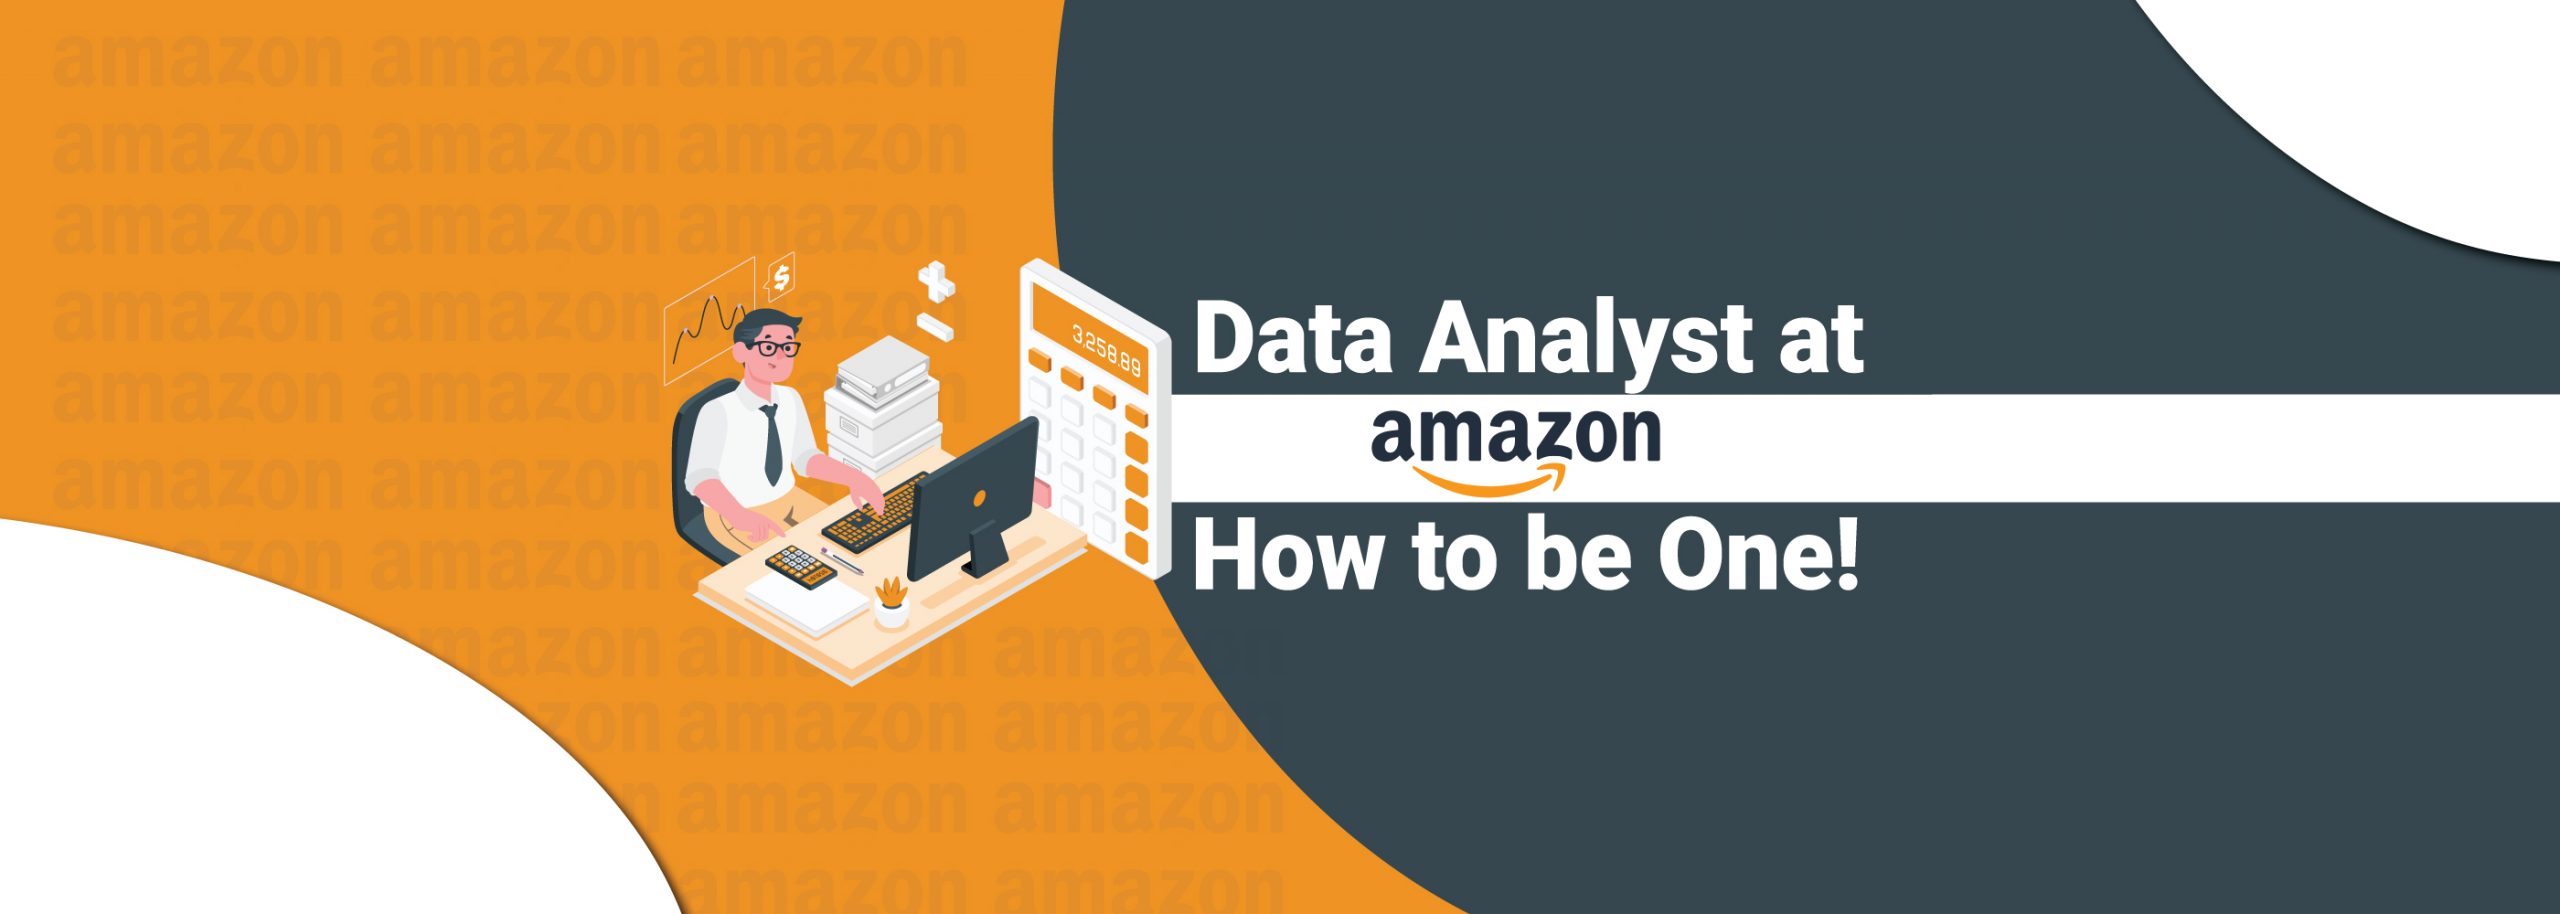 Data Analyst at Amazon- How to be one!